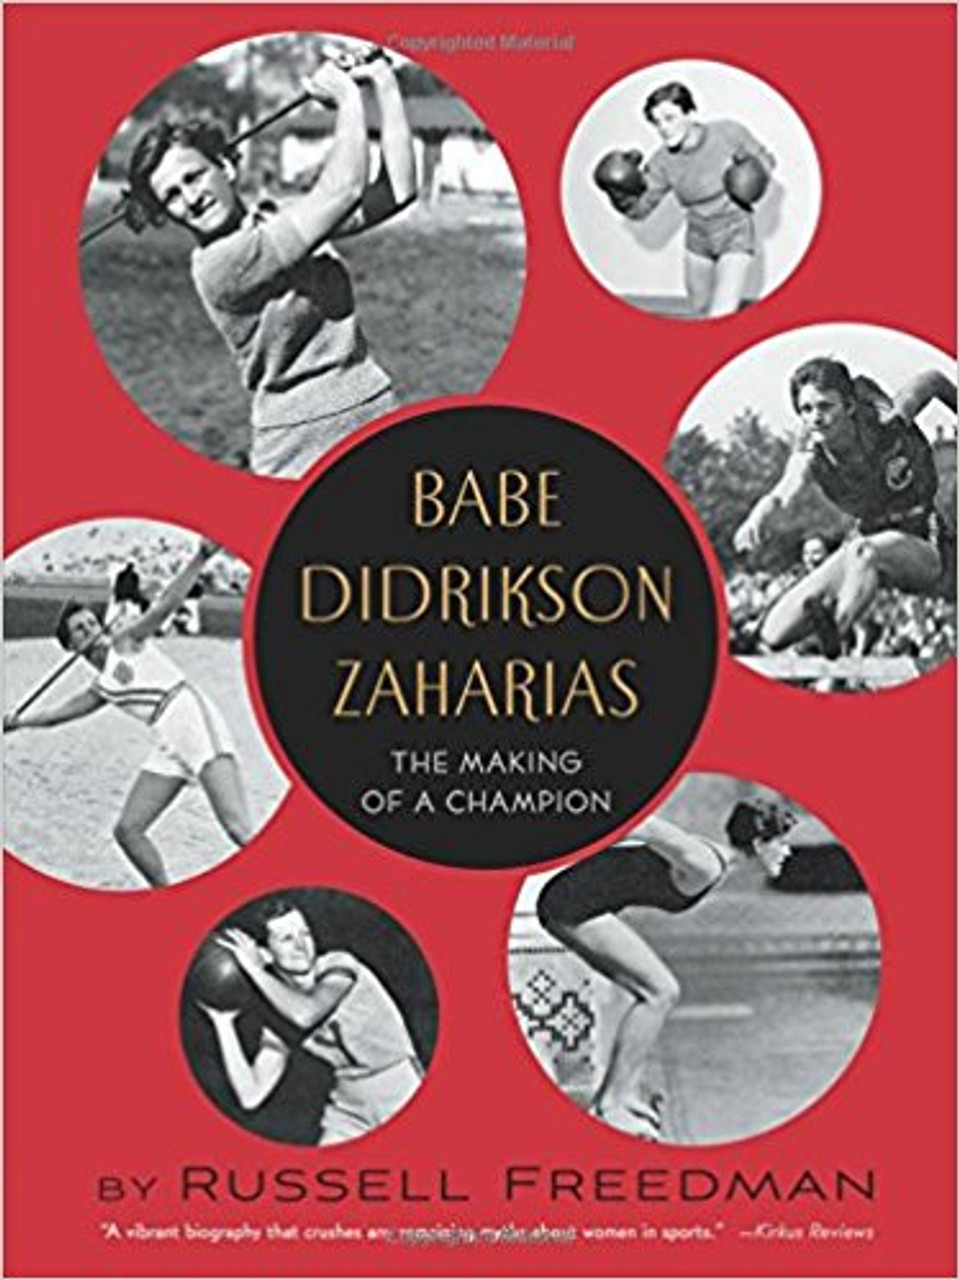 Babe Didrikson Zacharias: The Making of a Champion by Russell Freedman